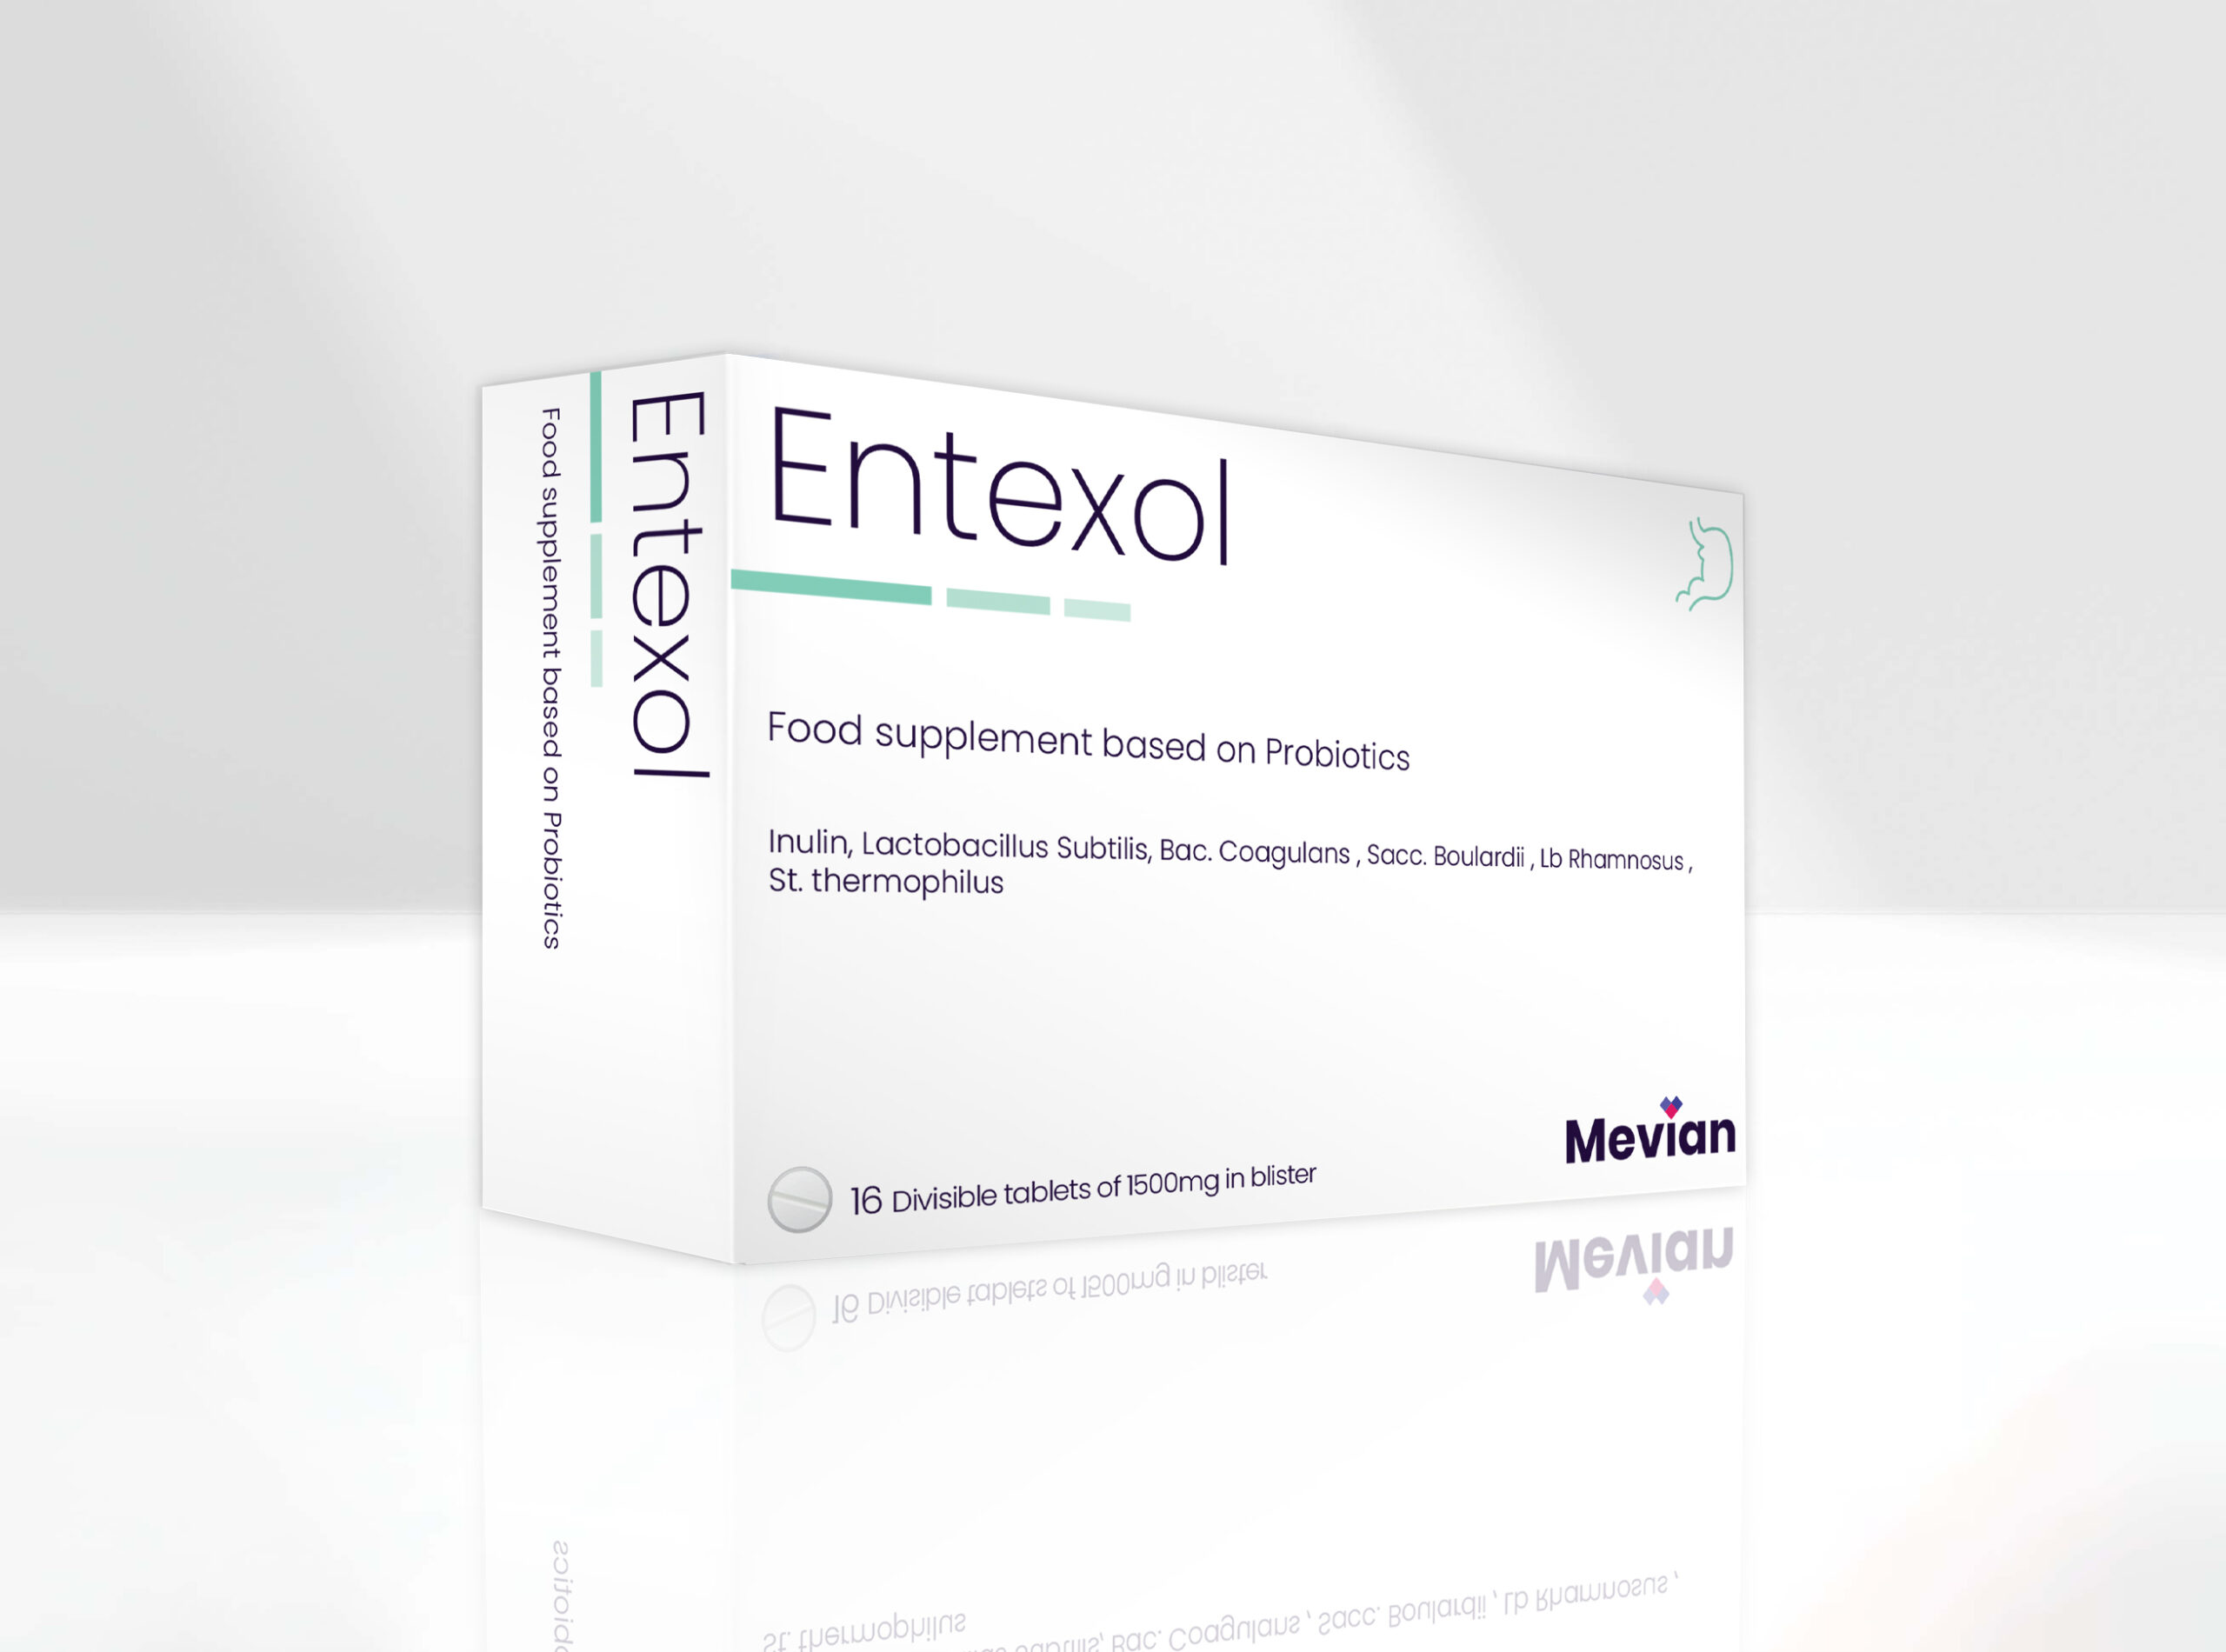 Entexol enables improved digestion and assimilation, helping in cases of constipation and diarrhea.